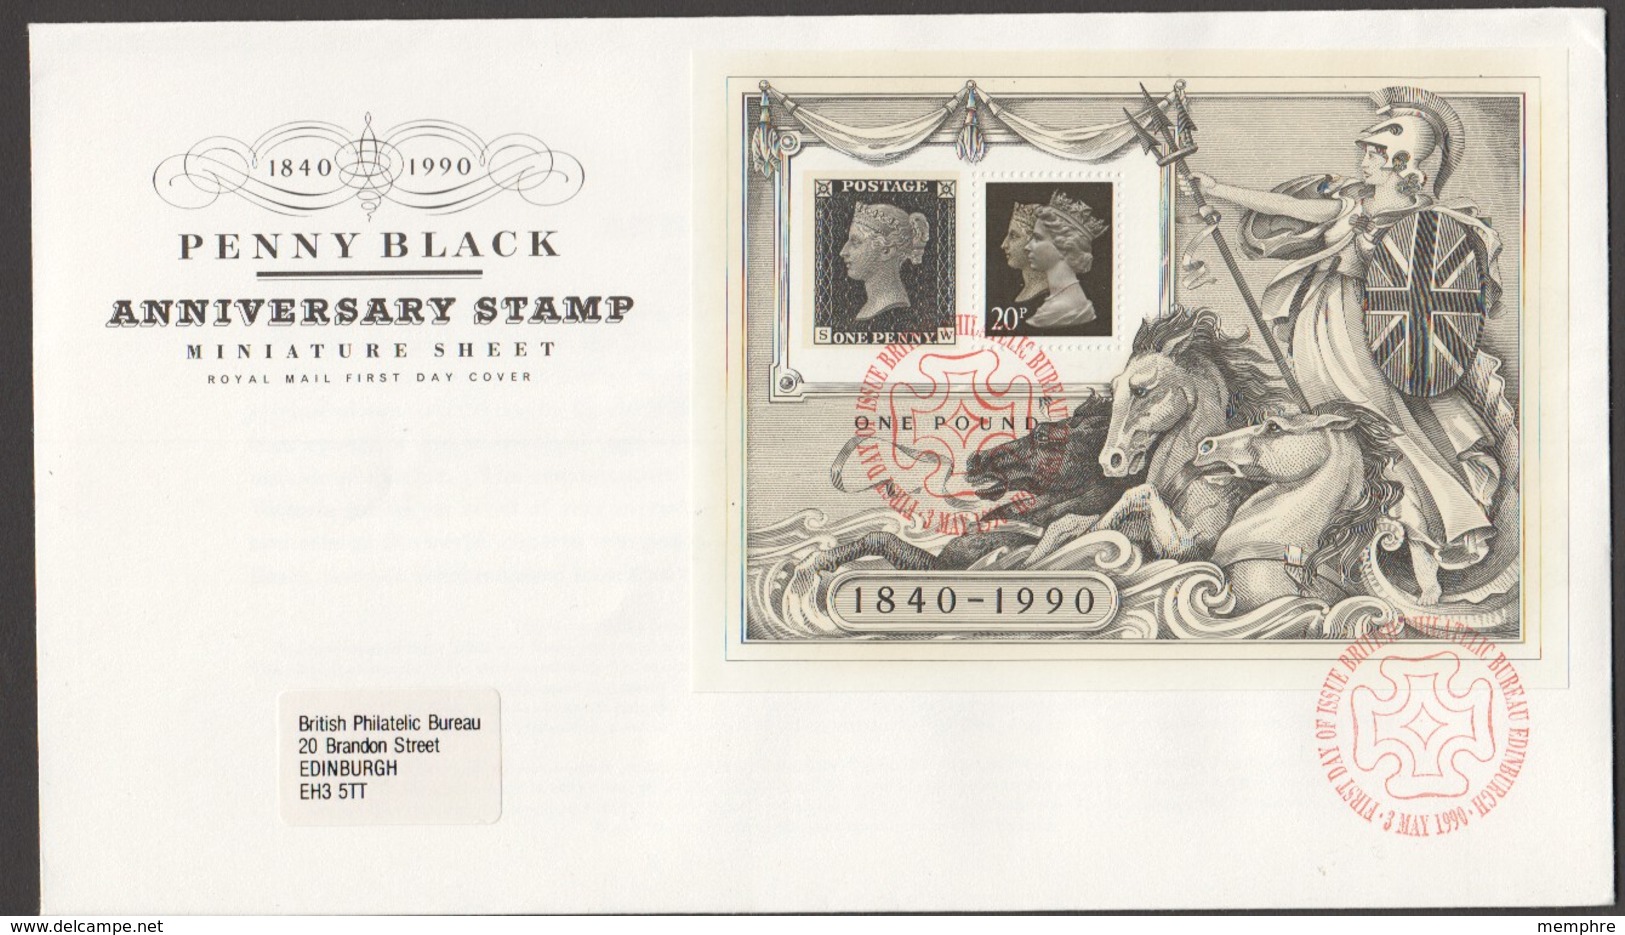 1990 Penny Black Miniature Sheet   RM FDC   City Of London  Special Red Handstamp - 1981-1990 Decimal Issues